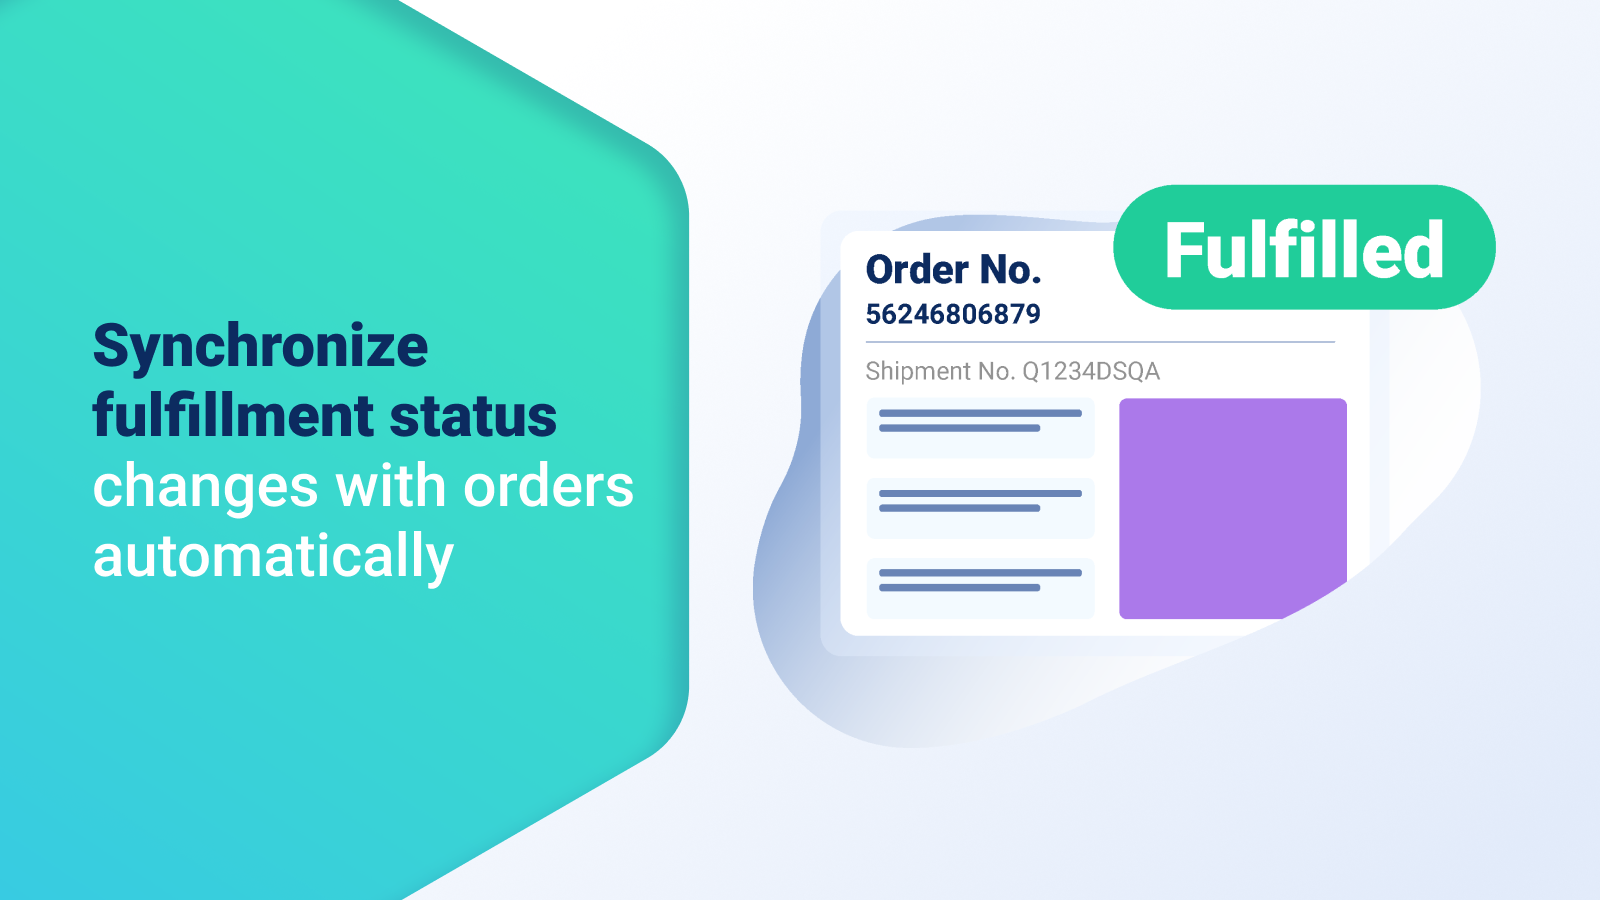 Synchronize fulfillment status changes with orders automatically